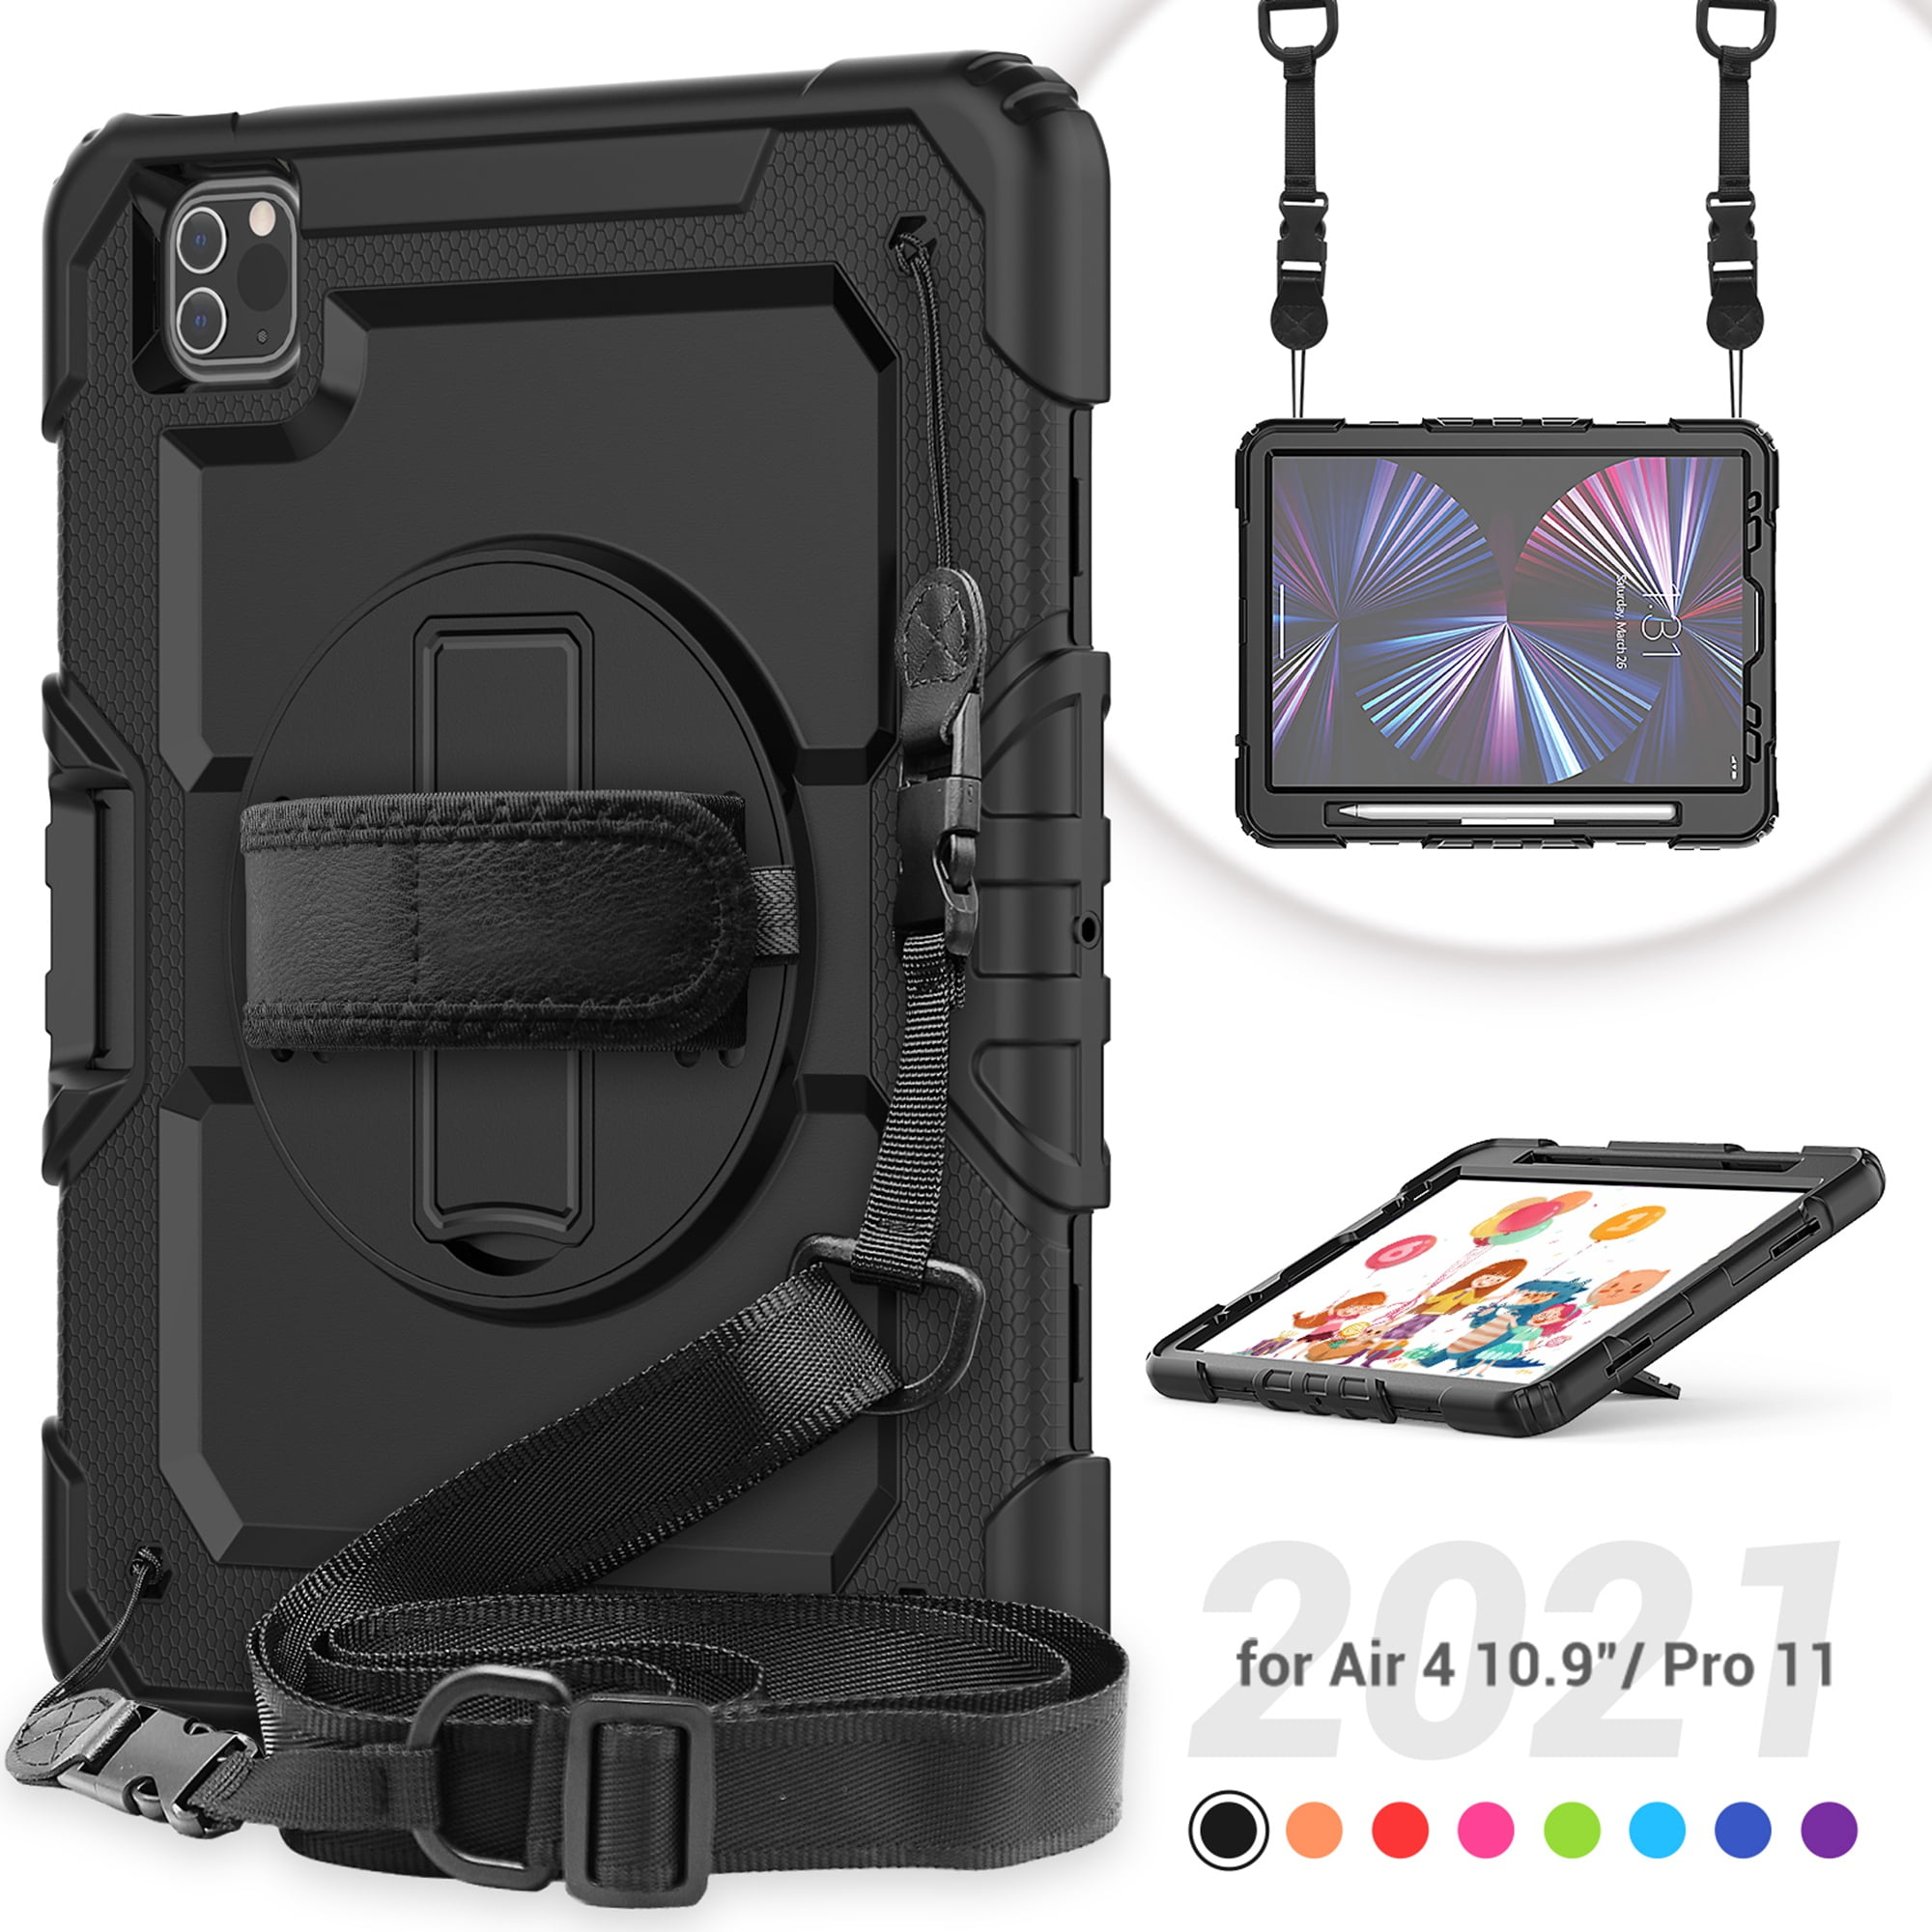 New Timecity Case for iPad Pro 12.9 5th Generation 2021, iPad Pro 12.9 4th/ 3rd Generation Case 2020/ 2018 with Built-in Screen Protector/ 360 Degree